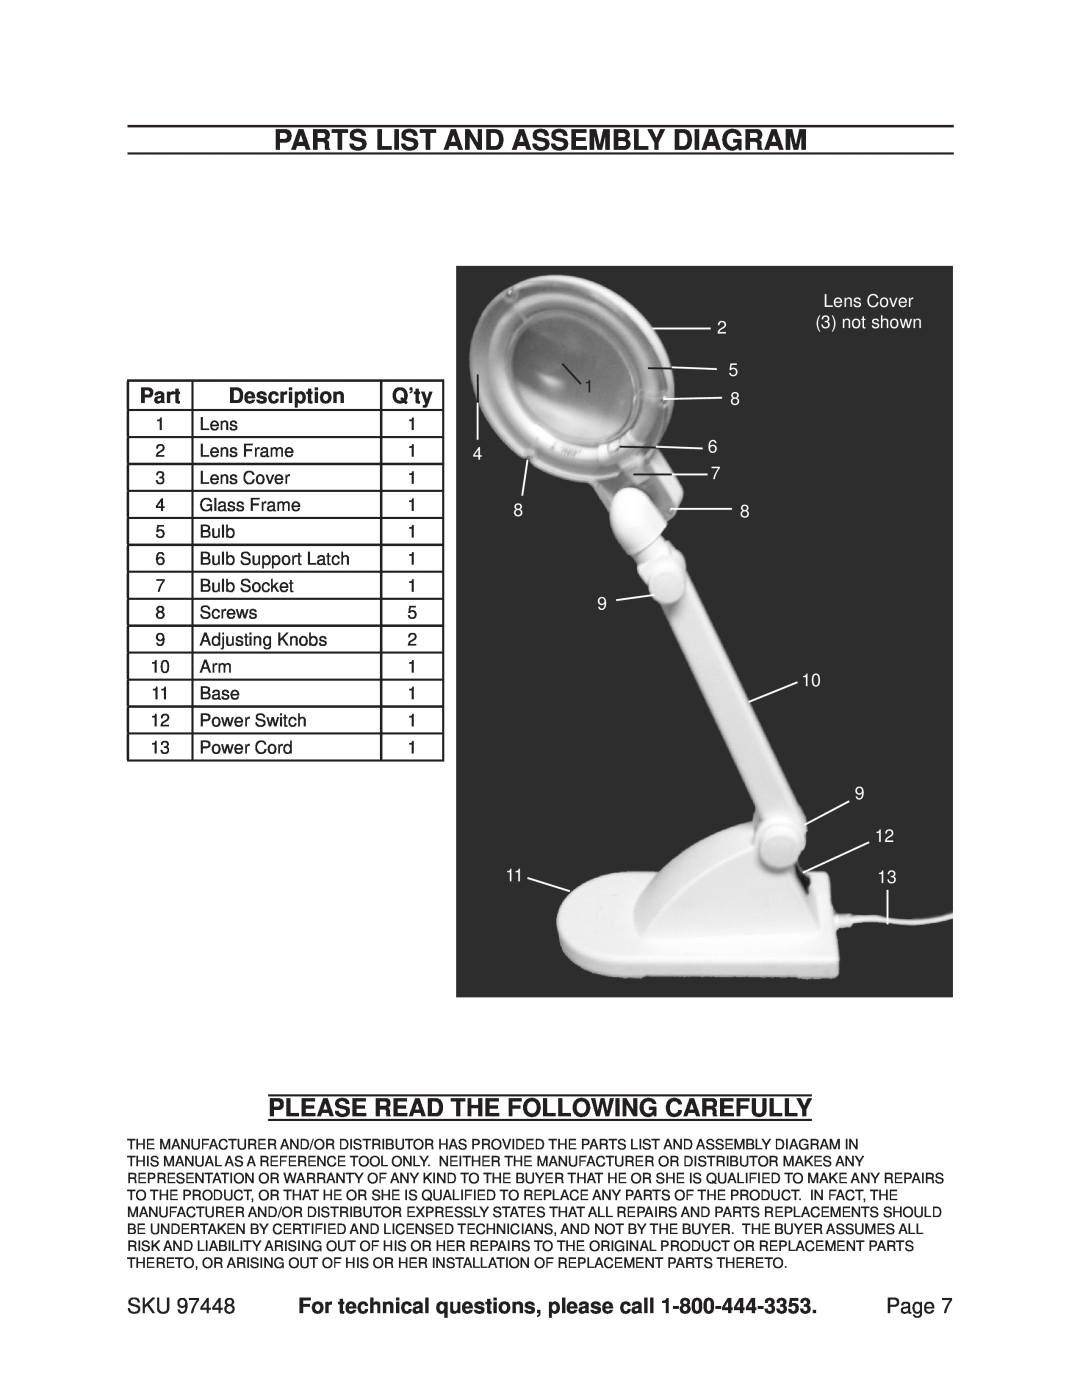 Chicago Electric 97448 Parts List And Assembly Diagram, Please Read The Following Carefully, Description, Q’ty, Lens Cover 